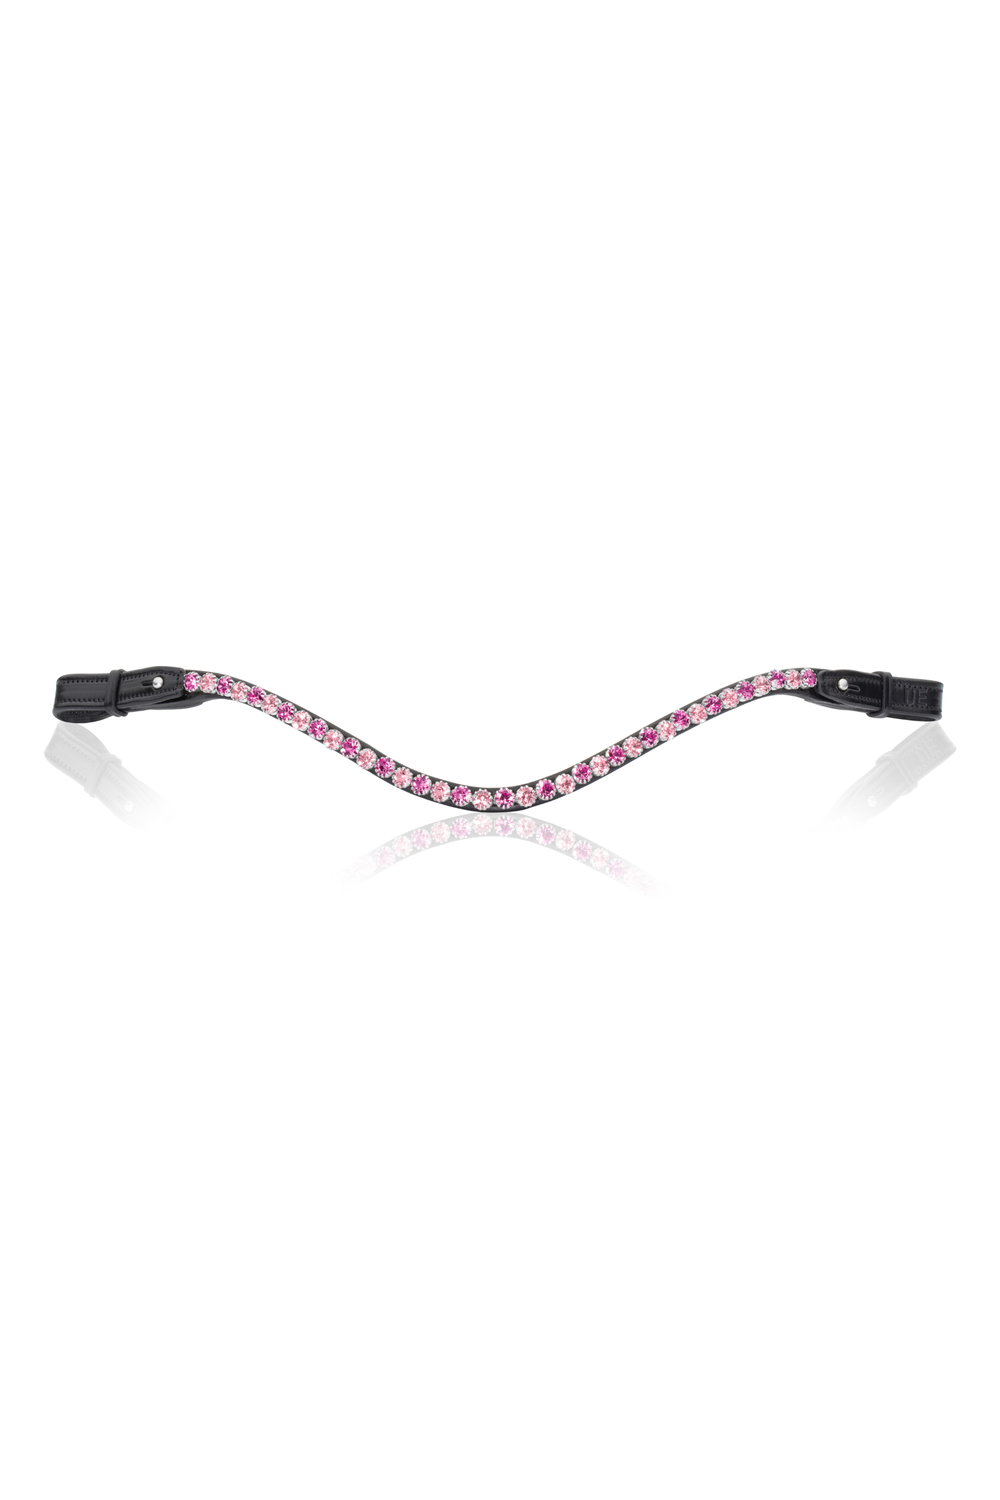 Utzon Equestrian Elegant Browband Party Pink